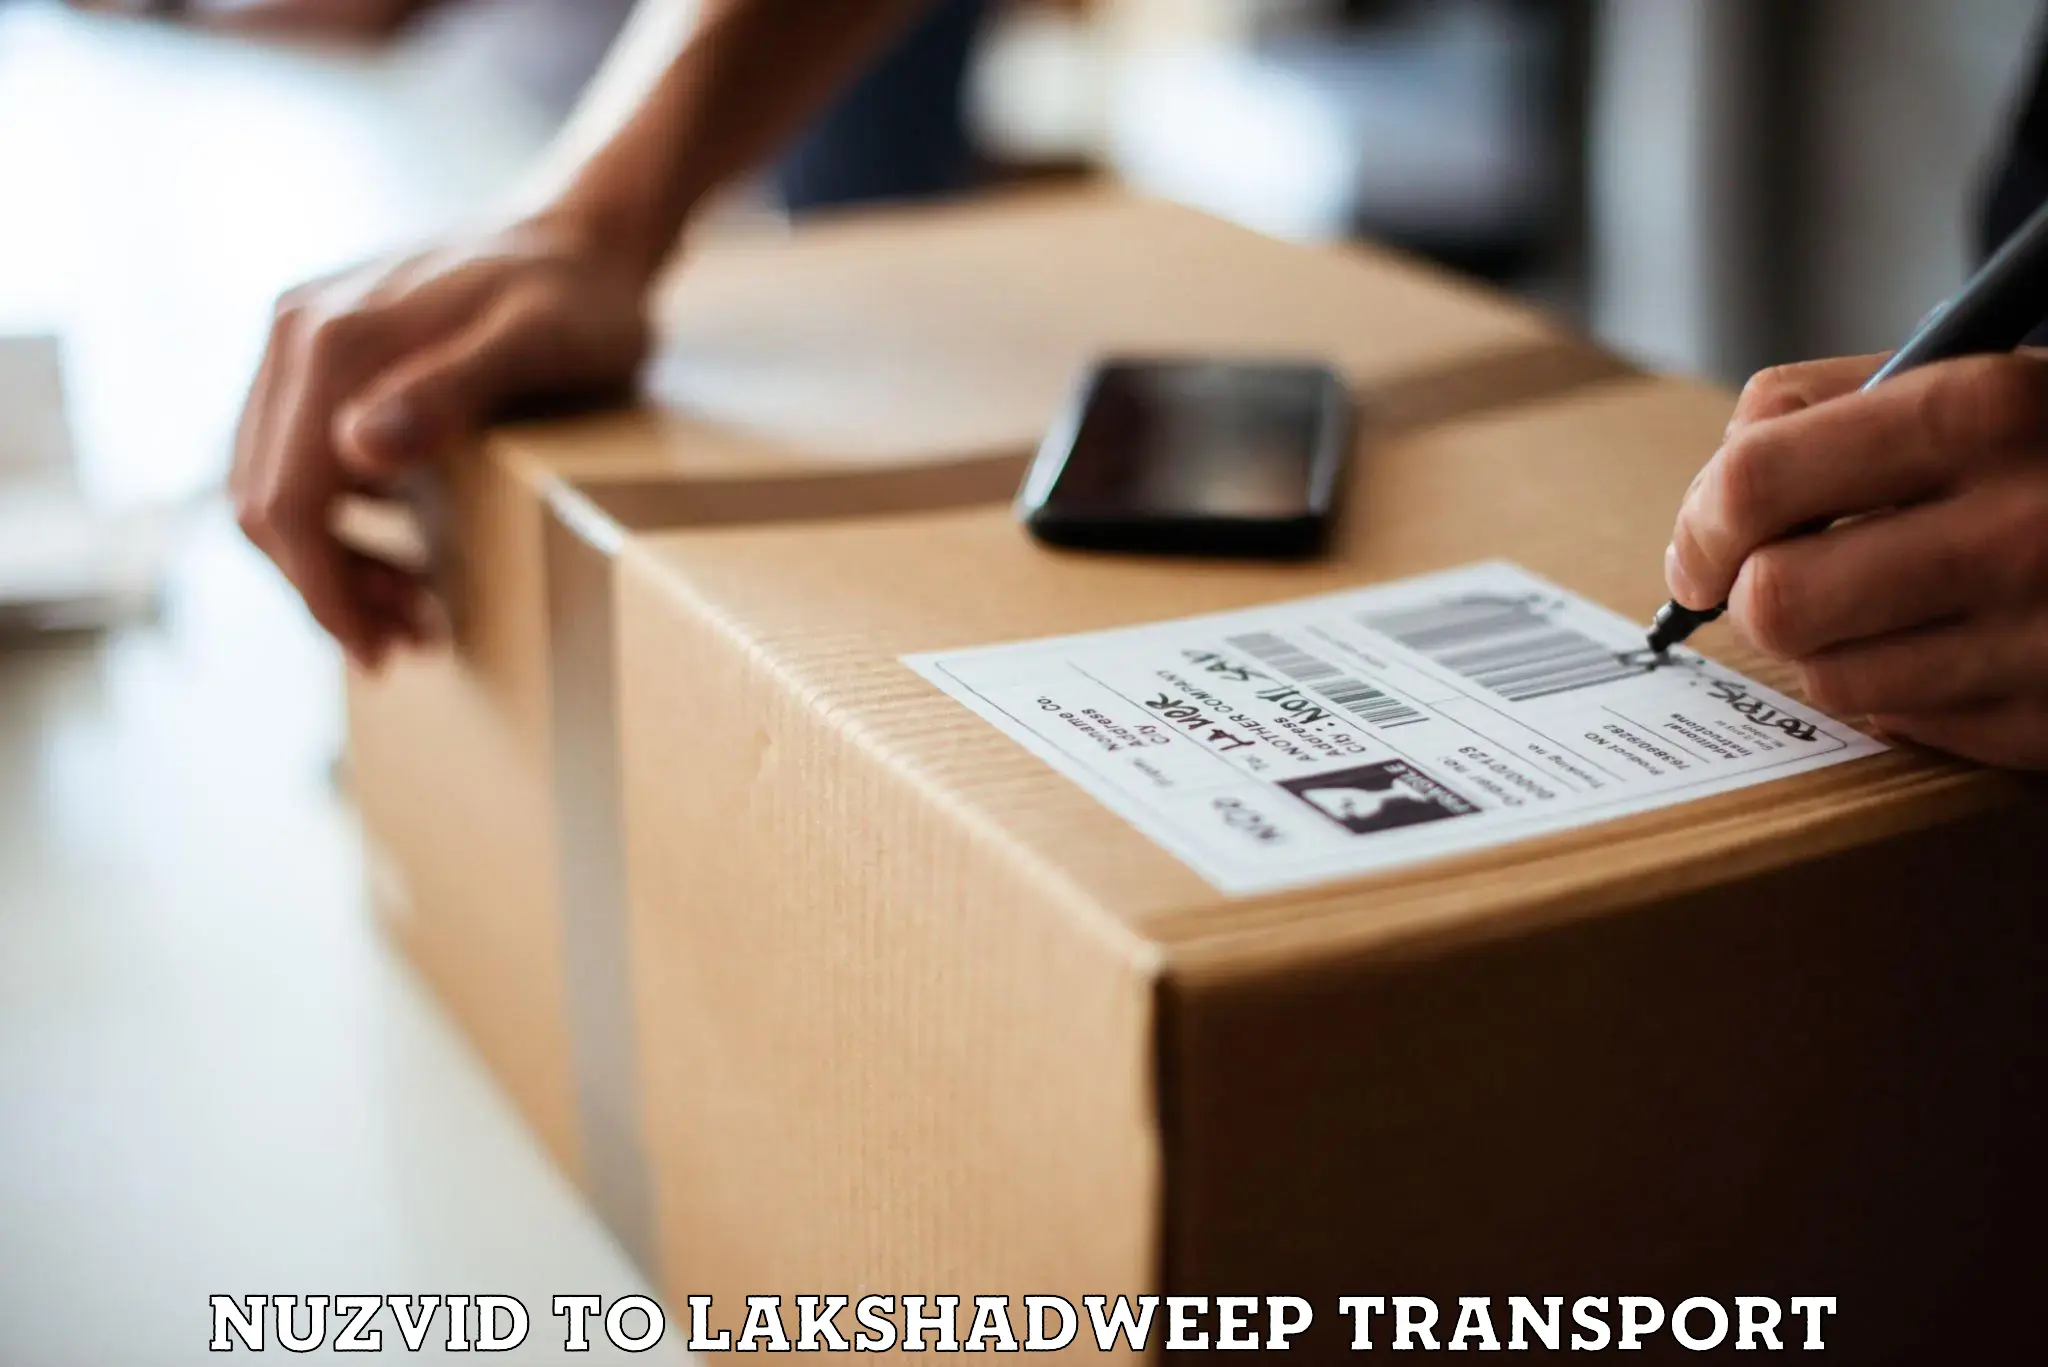 Daily parcel service transport Nuzvid to Lakshadweep